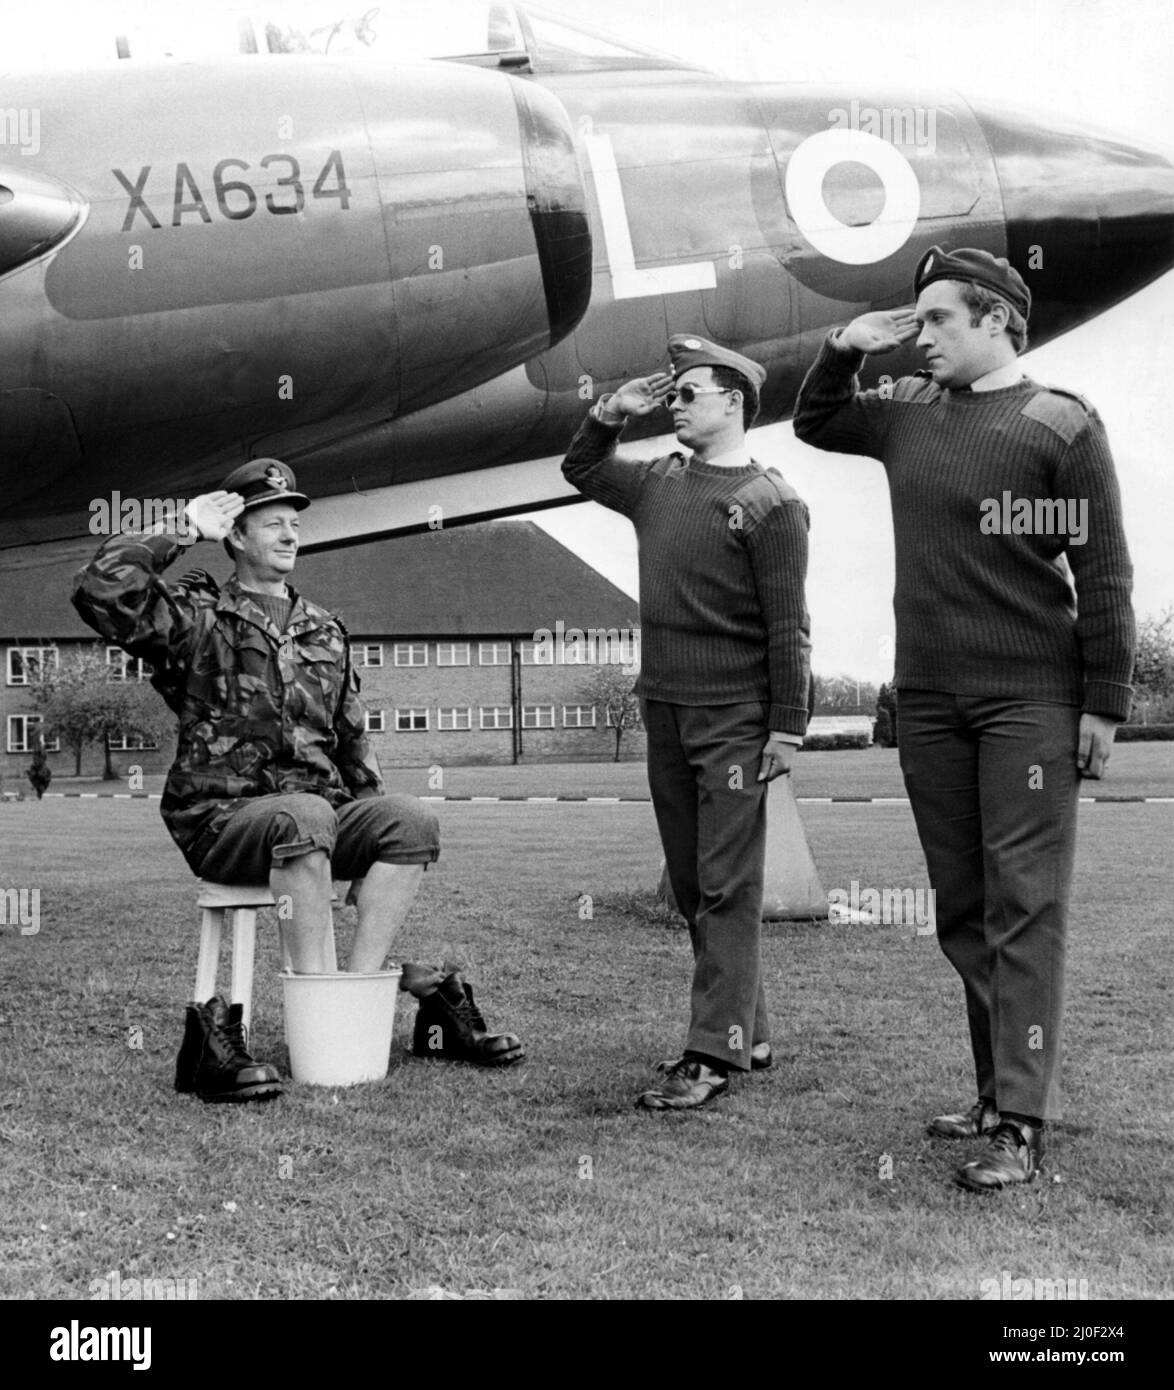 A picture from a series of humurous novelty images taken by Sunday People photographer Dennis Hutchinson - An officer soaking his feet under a Gloster Javelin receives a salute.   Circa: 1980 Stock Photo